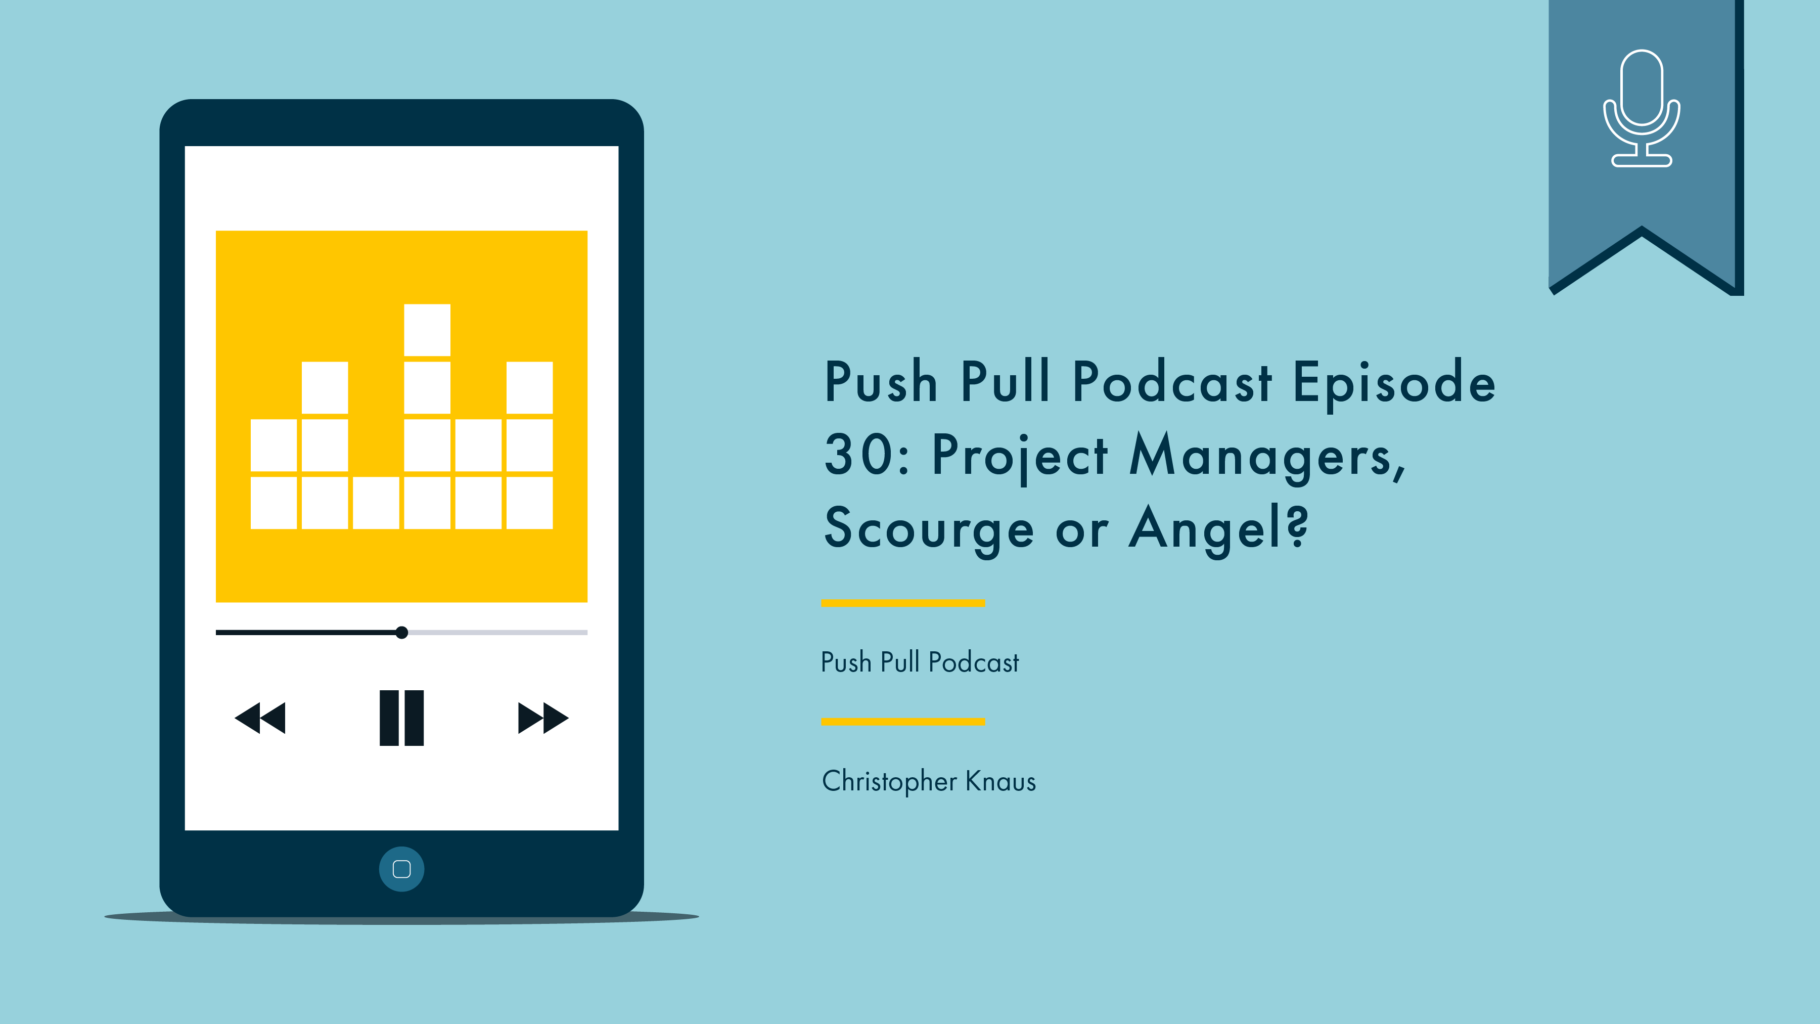 Phone with podcast artwork on the left. On the right reads “Push Pull Podcast: Project Managers, Scourge or Angel?, Push Pull Podcast, Christopher Knaus.” Above is a blue flag with a white icon denoting that this is a podcast.